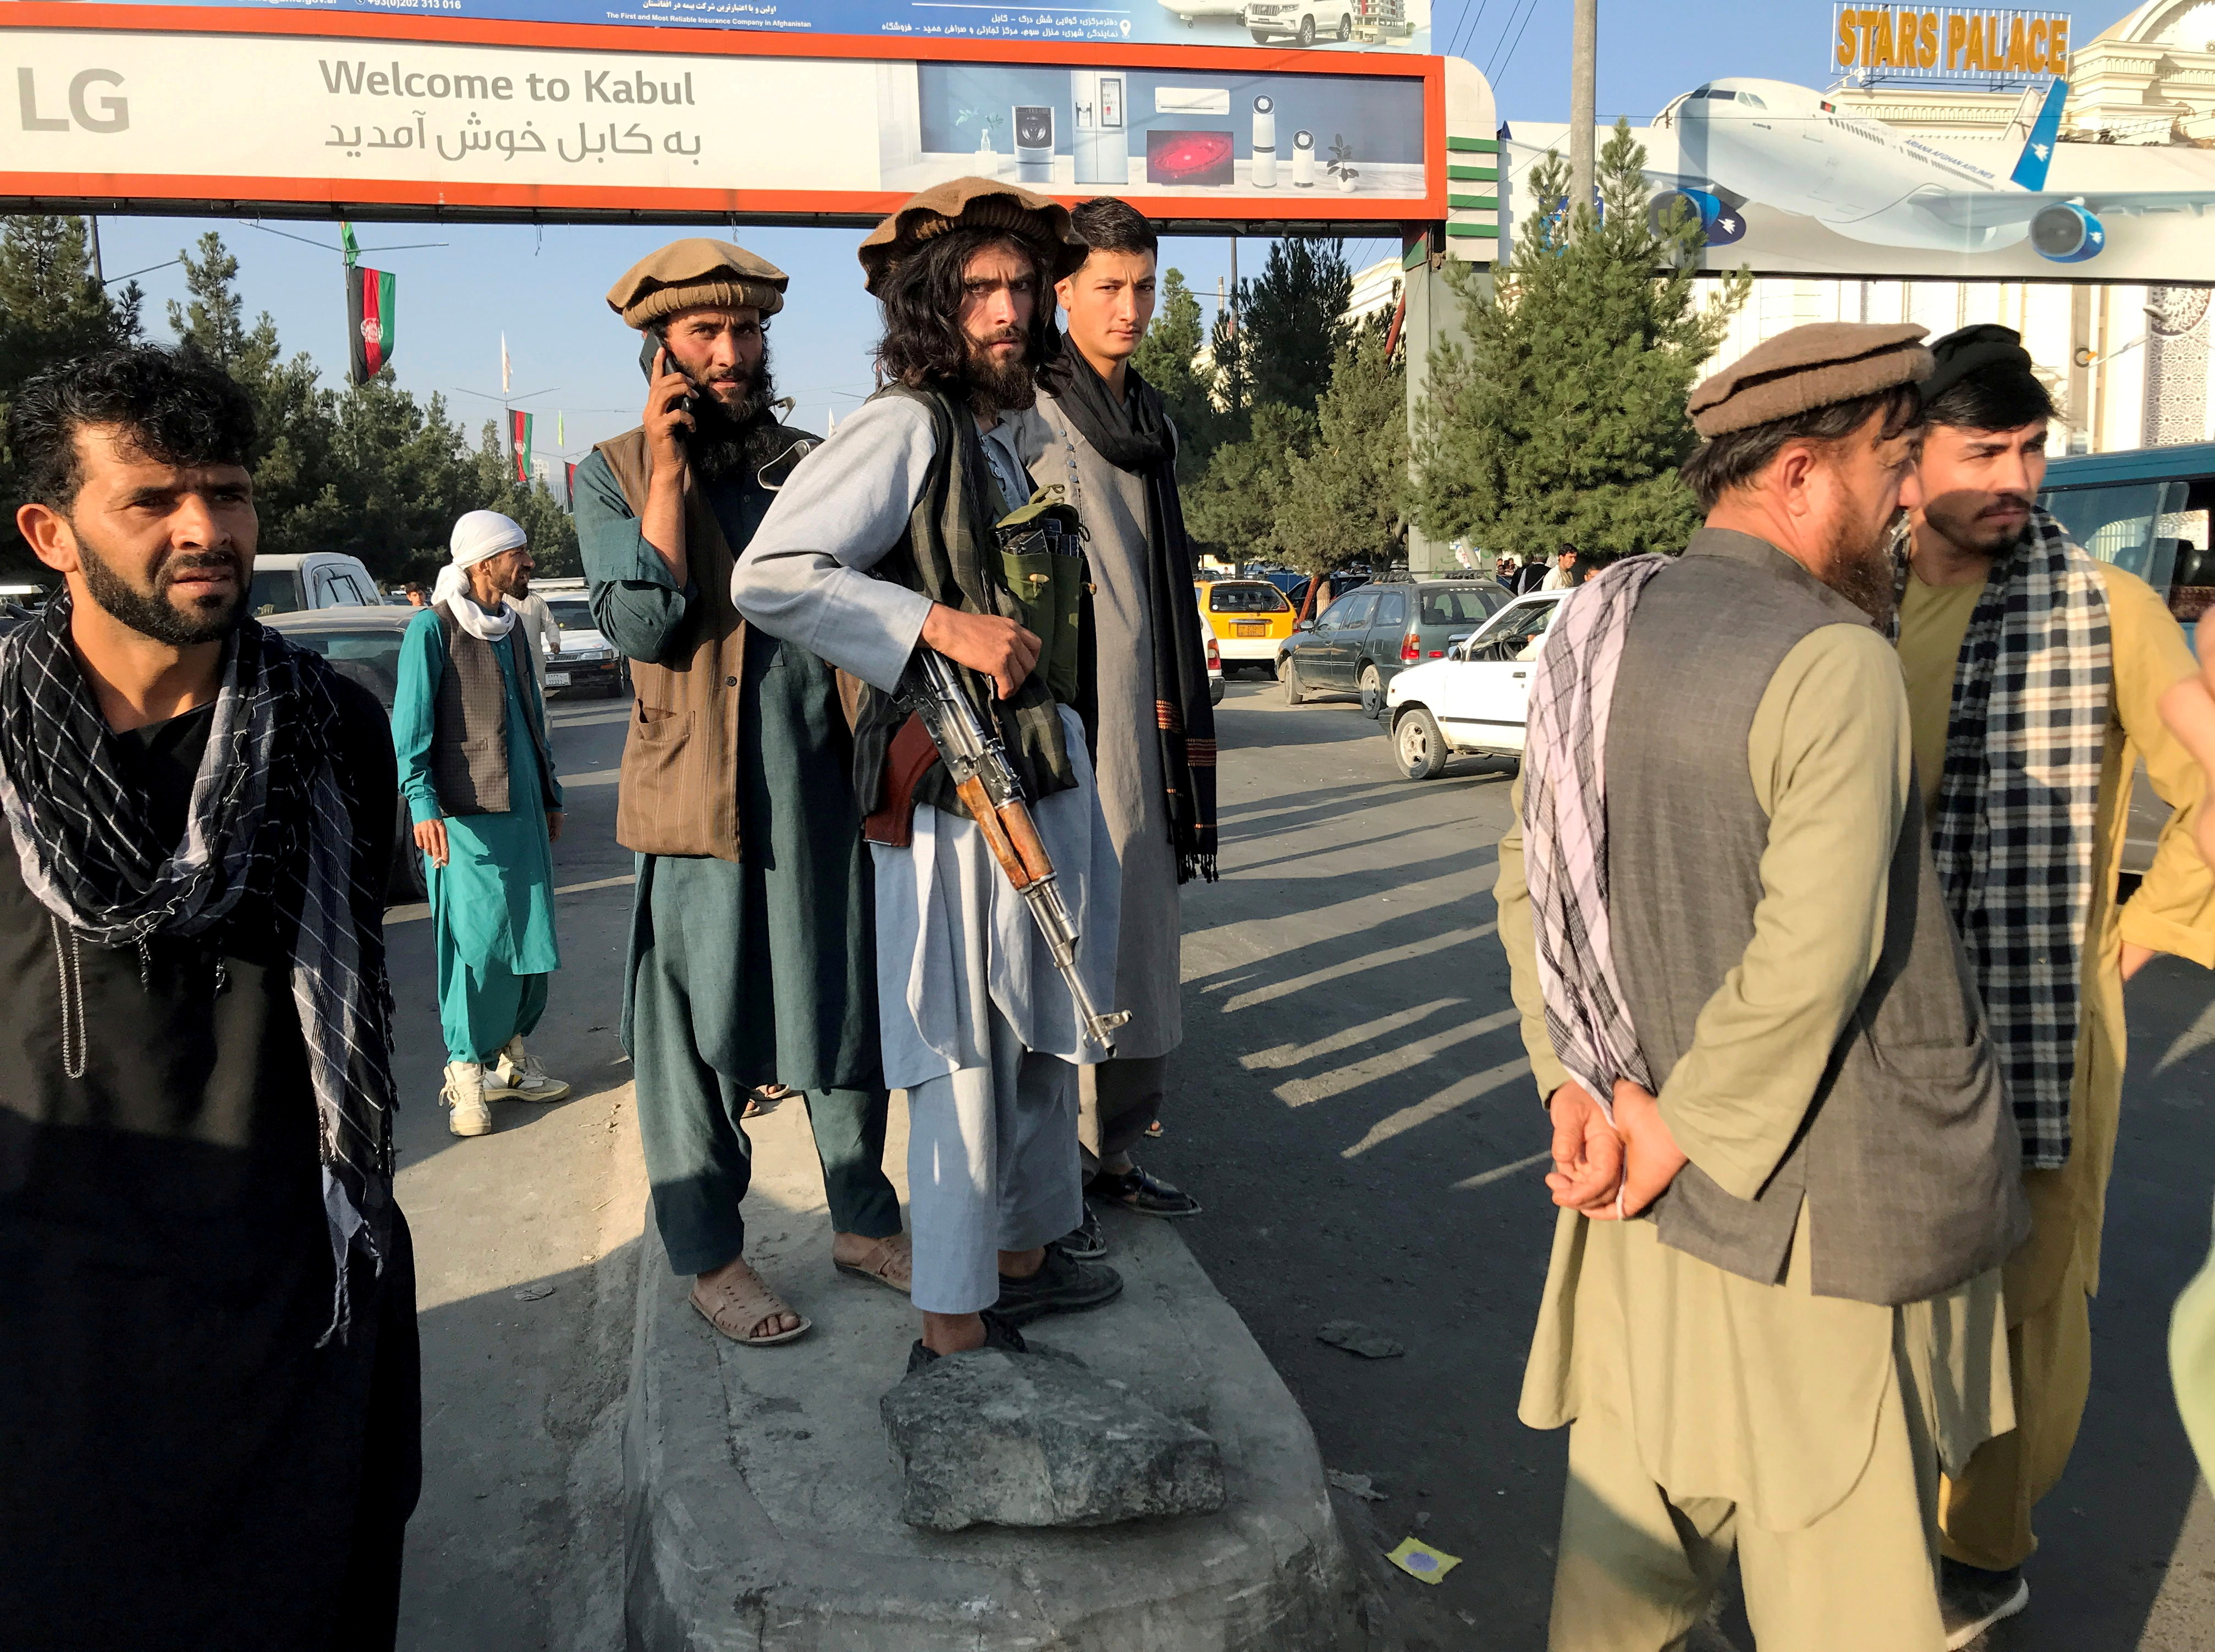 What do you chat about online in Kabul